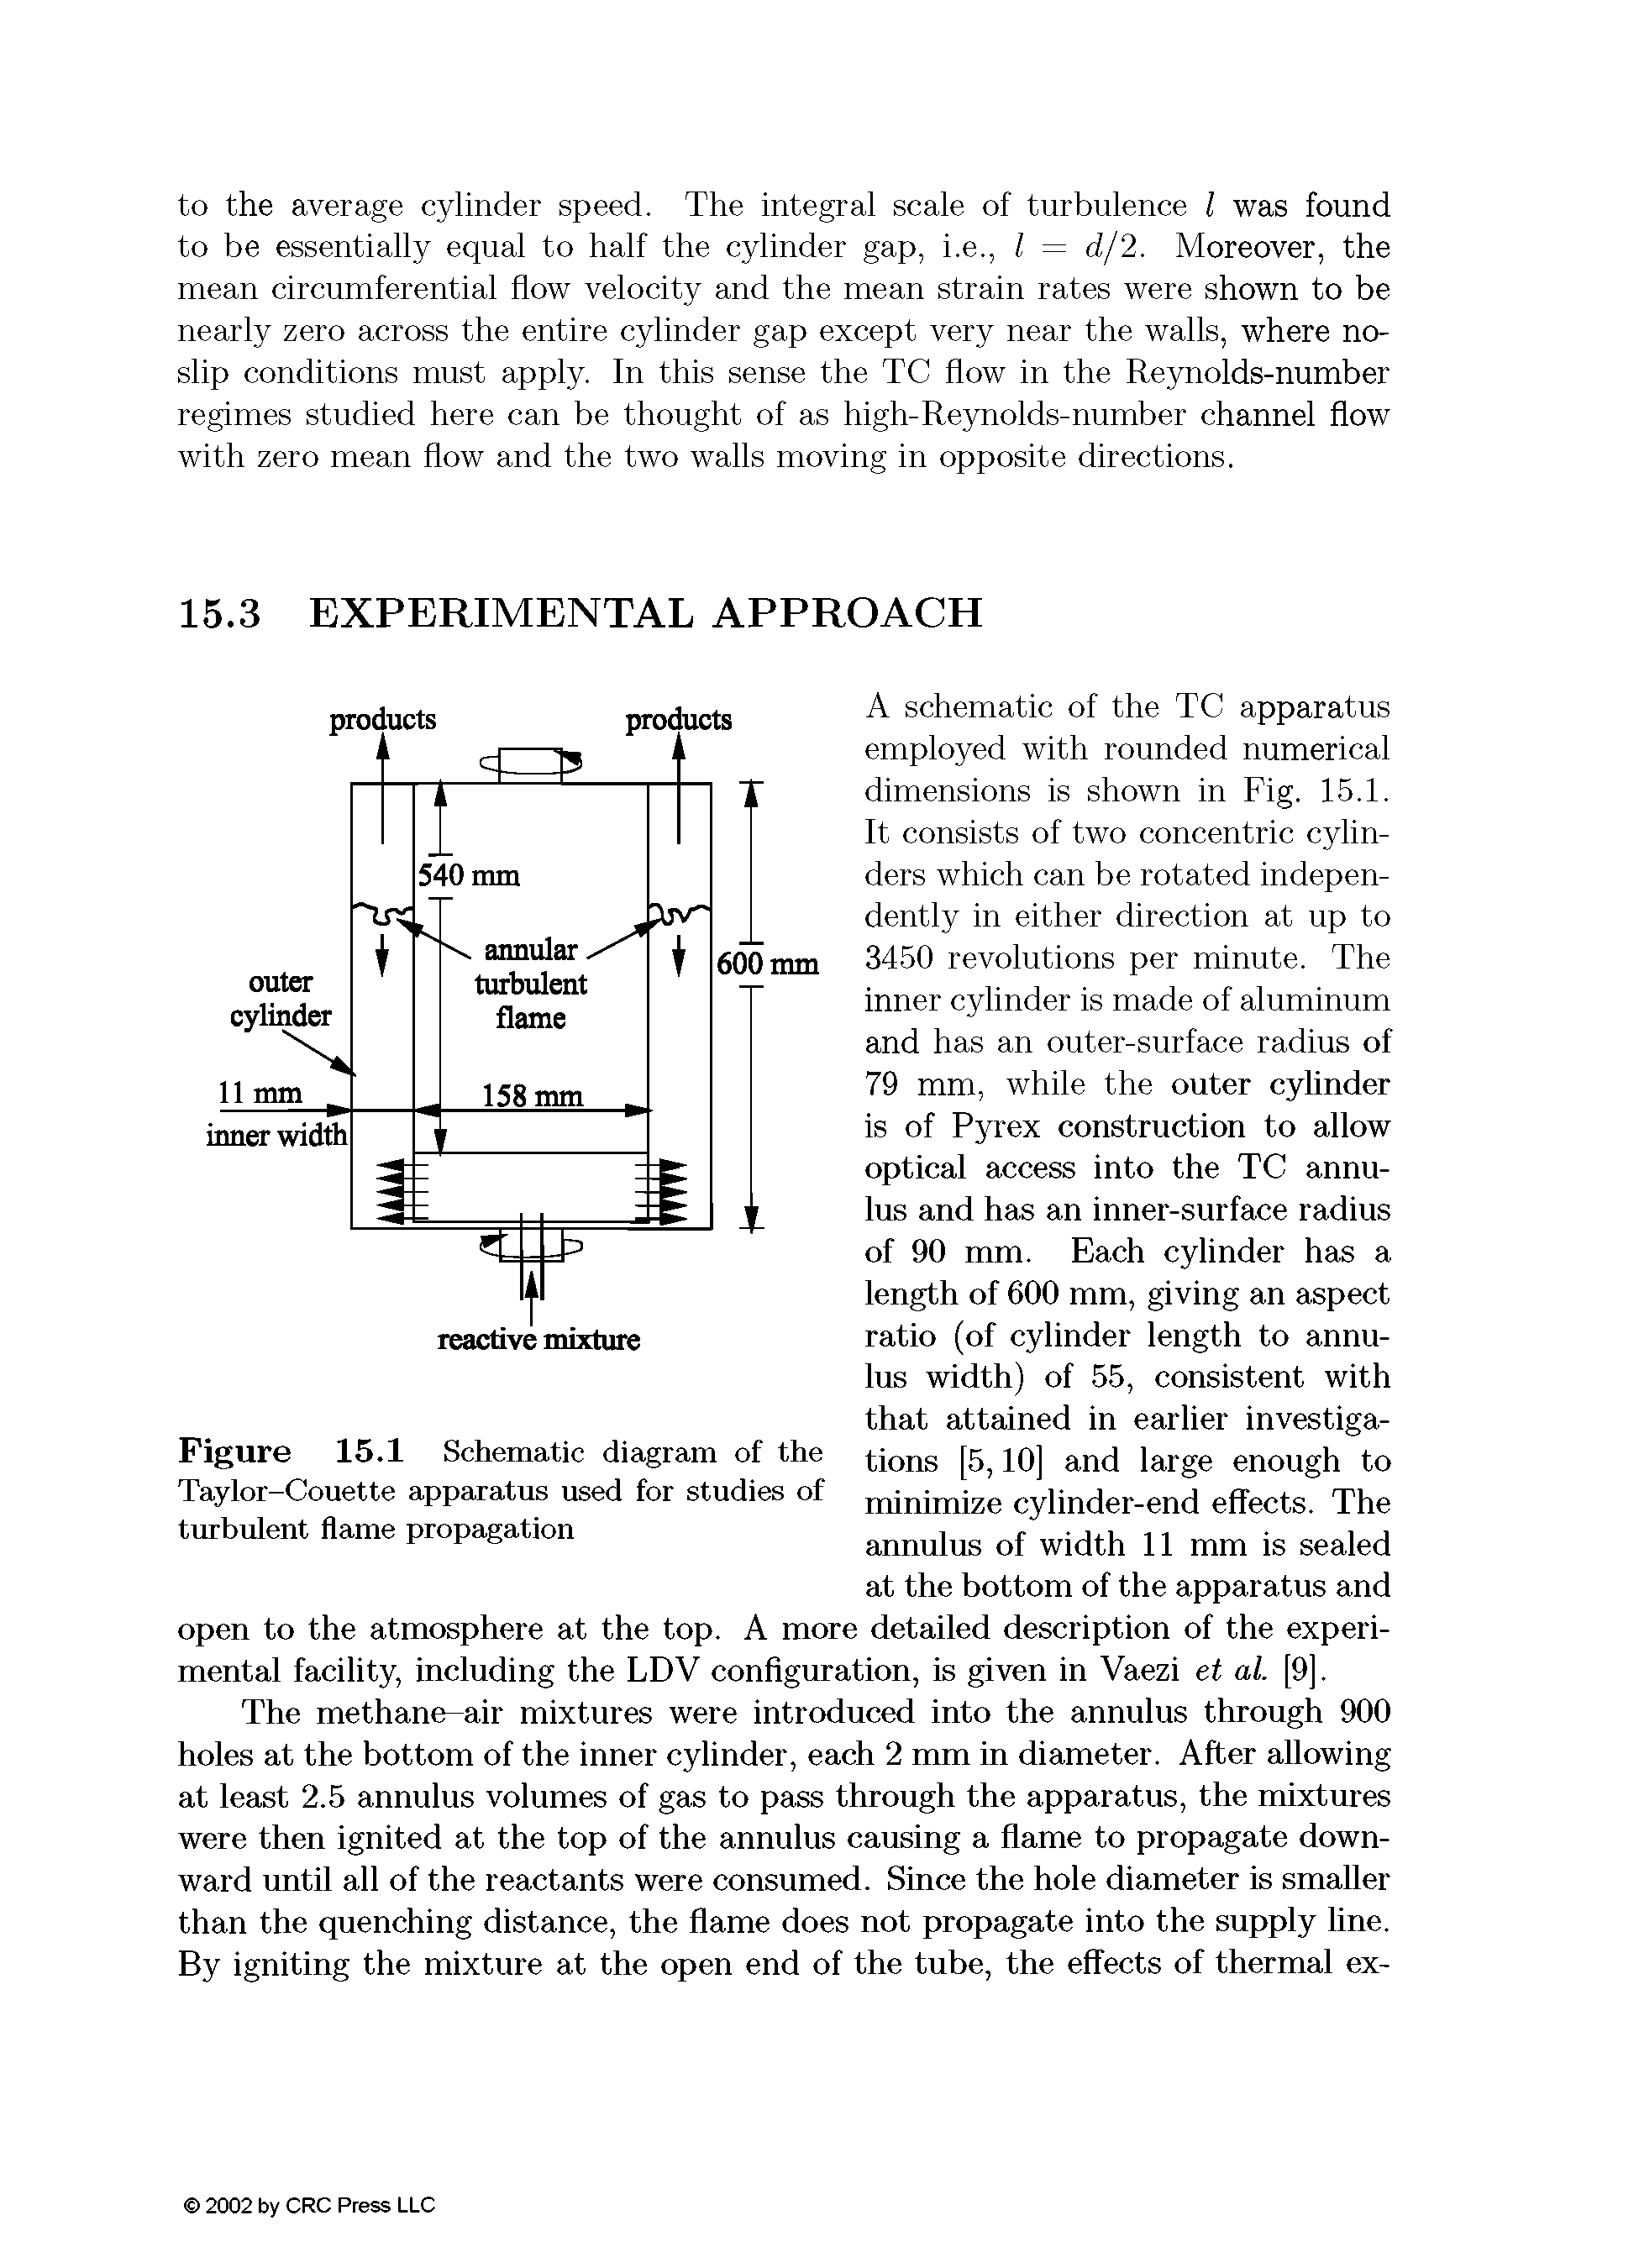 Figure 15.1 Schematic diagram of the Taylor-Couette apparatus used for studies of turbulent flame propagation...